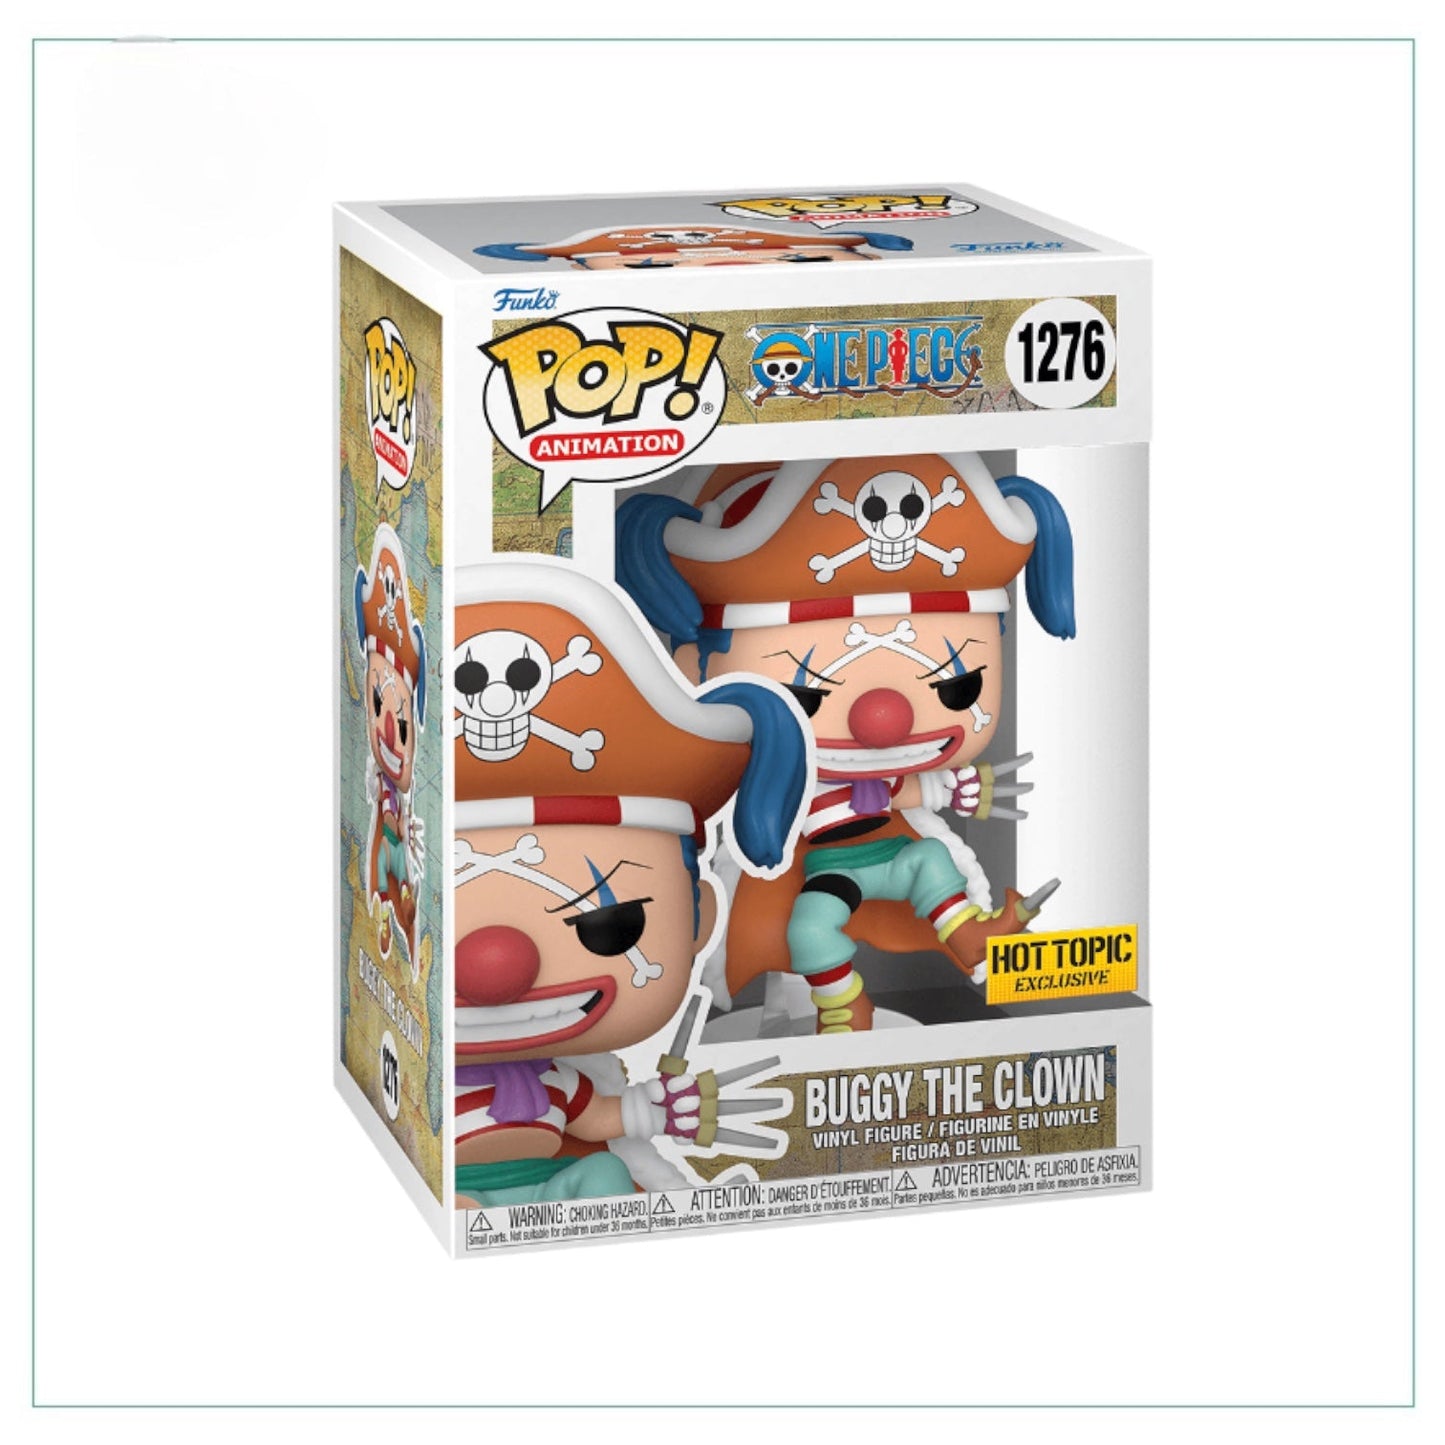 Buggy The Clown #1276 Funko Pop! - One Piece - Hot Topic Exclusive - Angry Cat